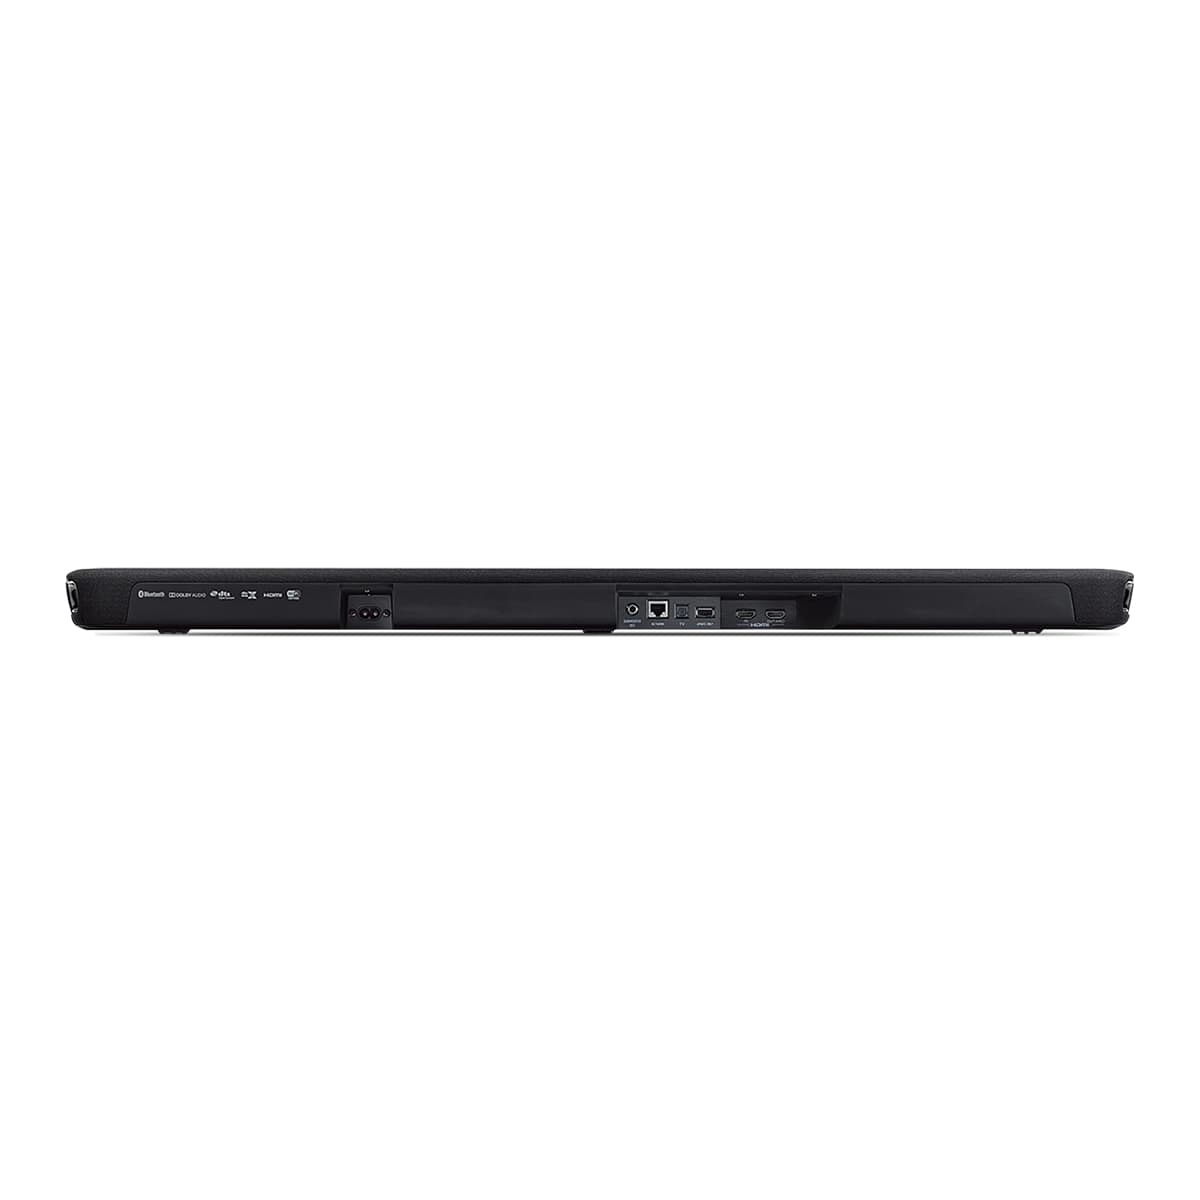 Yamaha Yas-109 Sound Bar with Built-in Subwoofers, Bluetooth - image 4 of 10